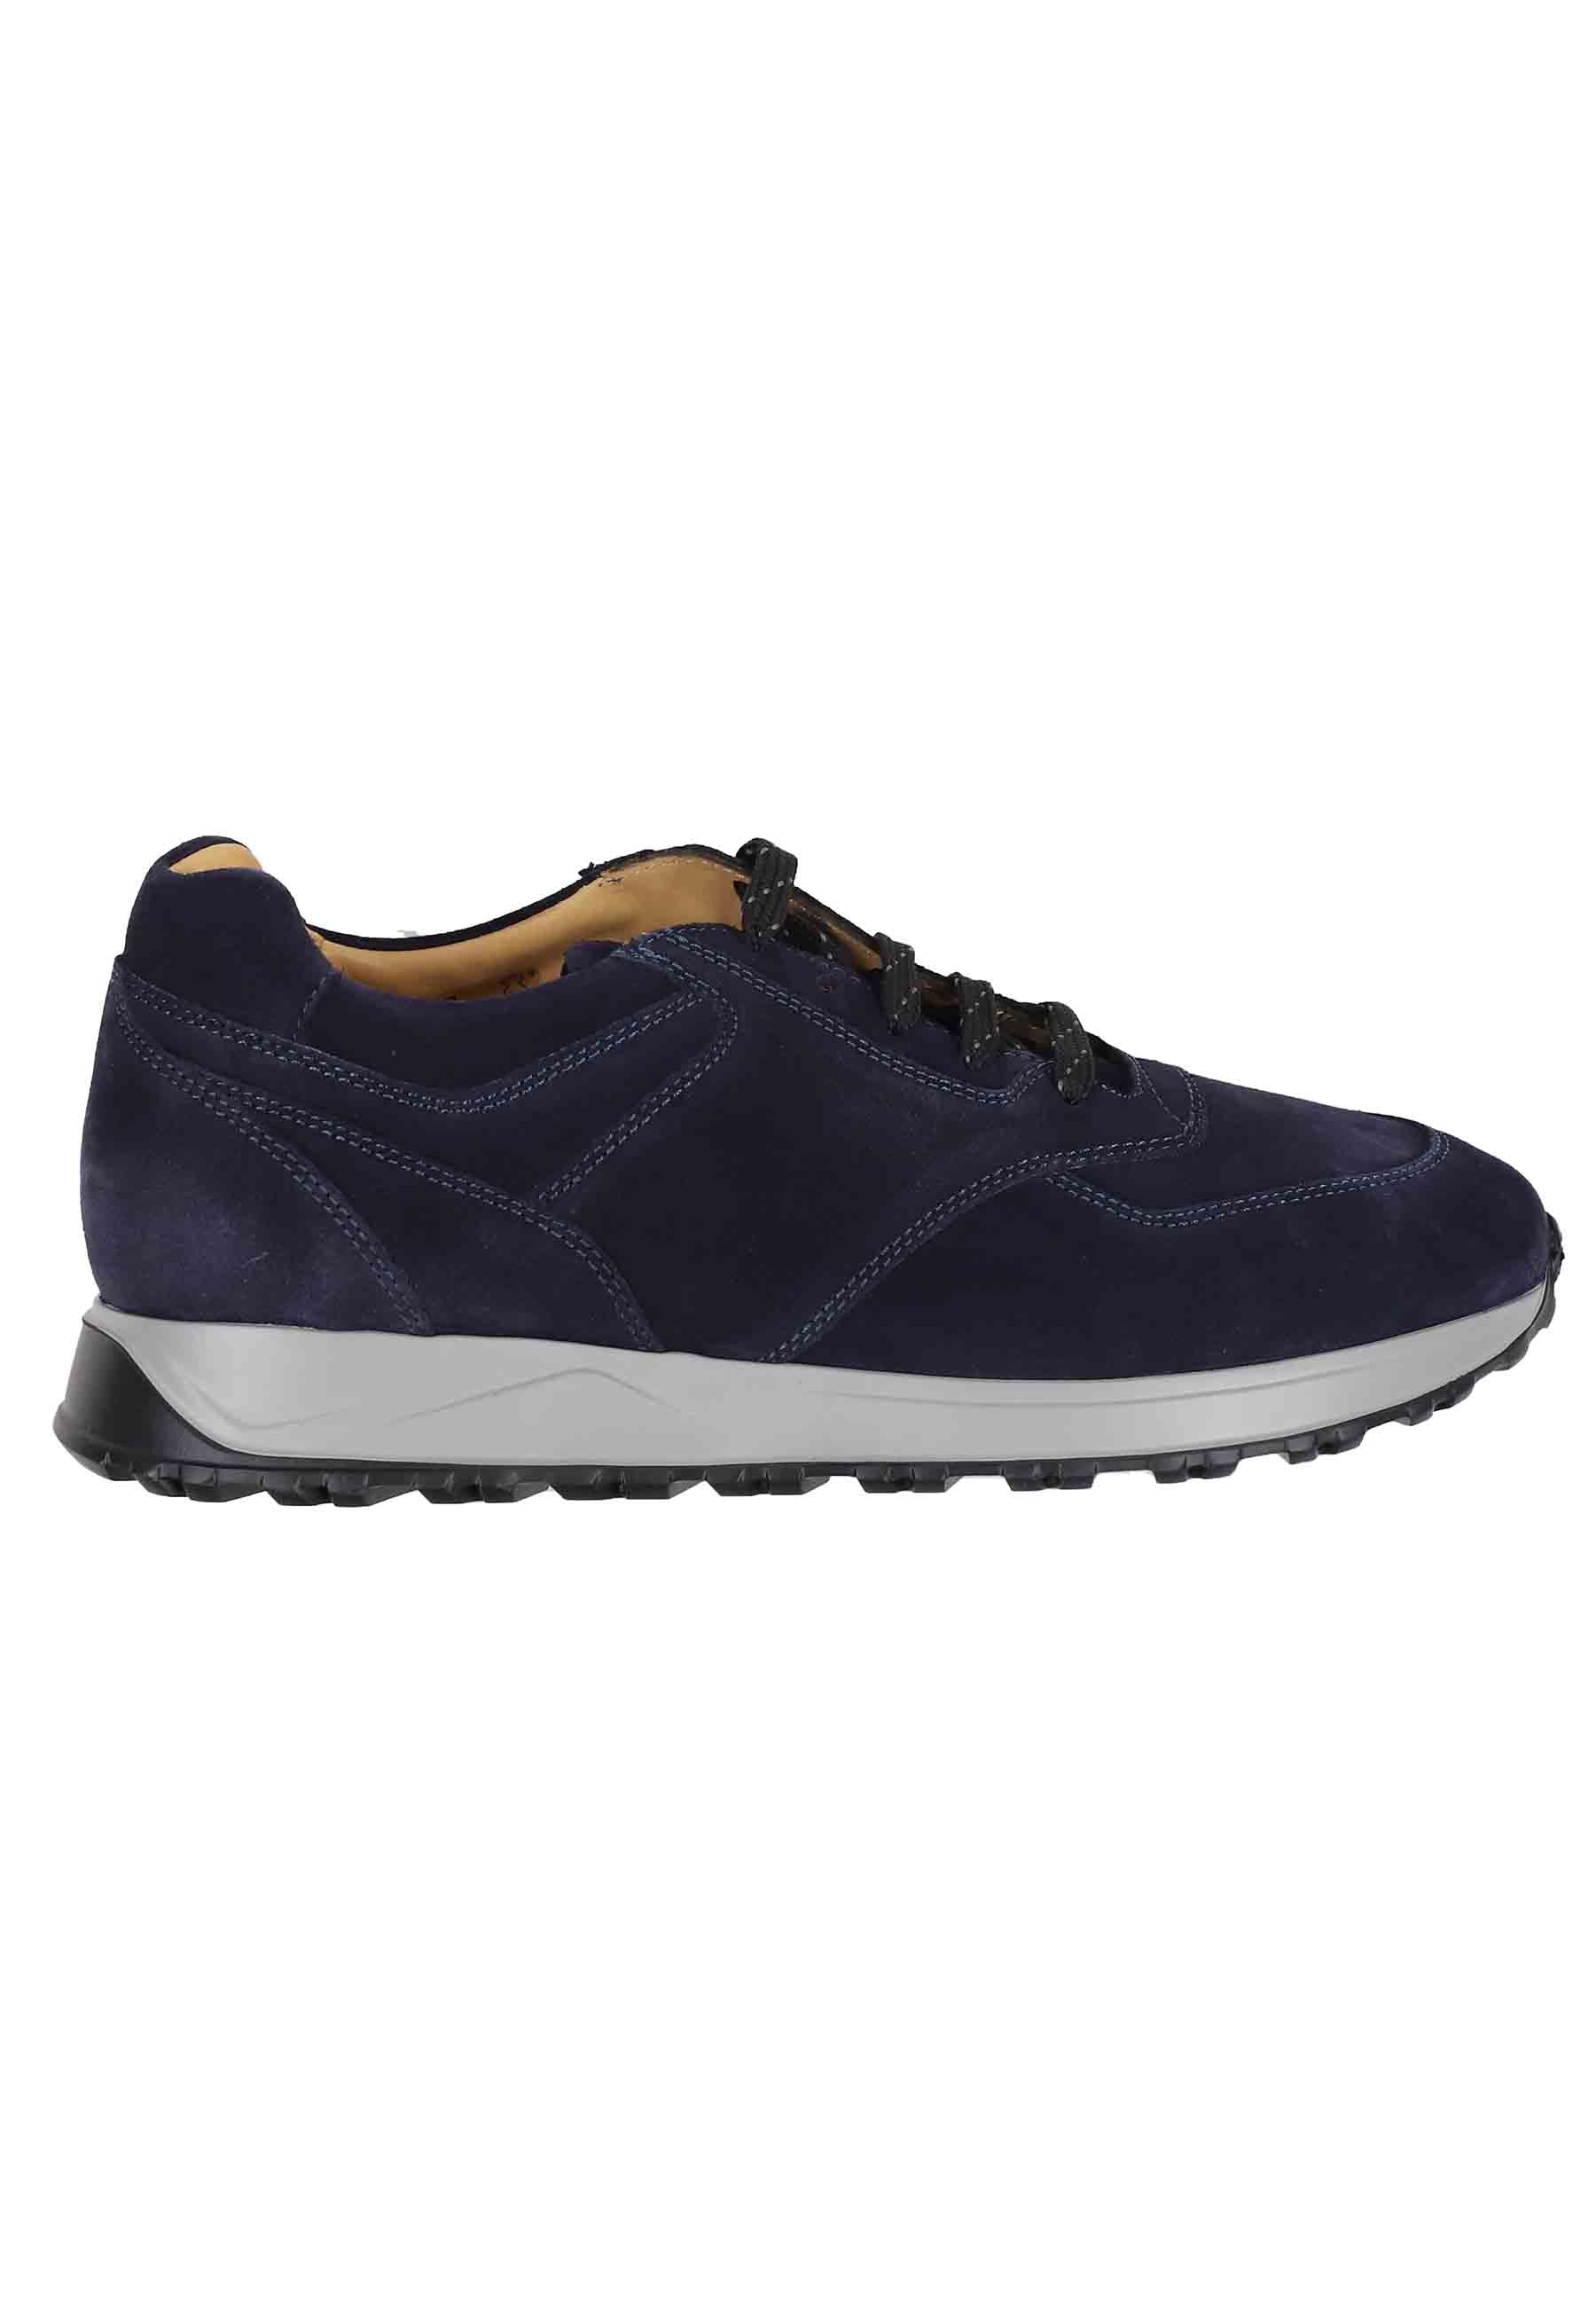 Men's sneakers in blue suede with rubber sole